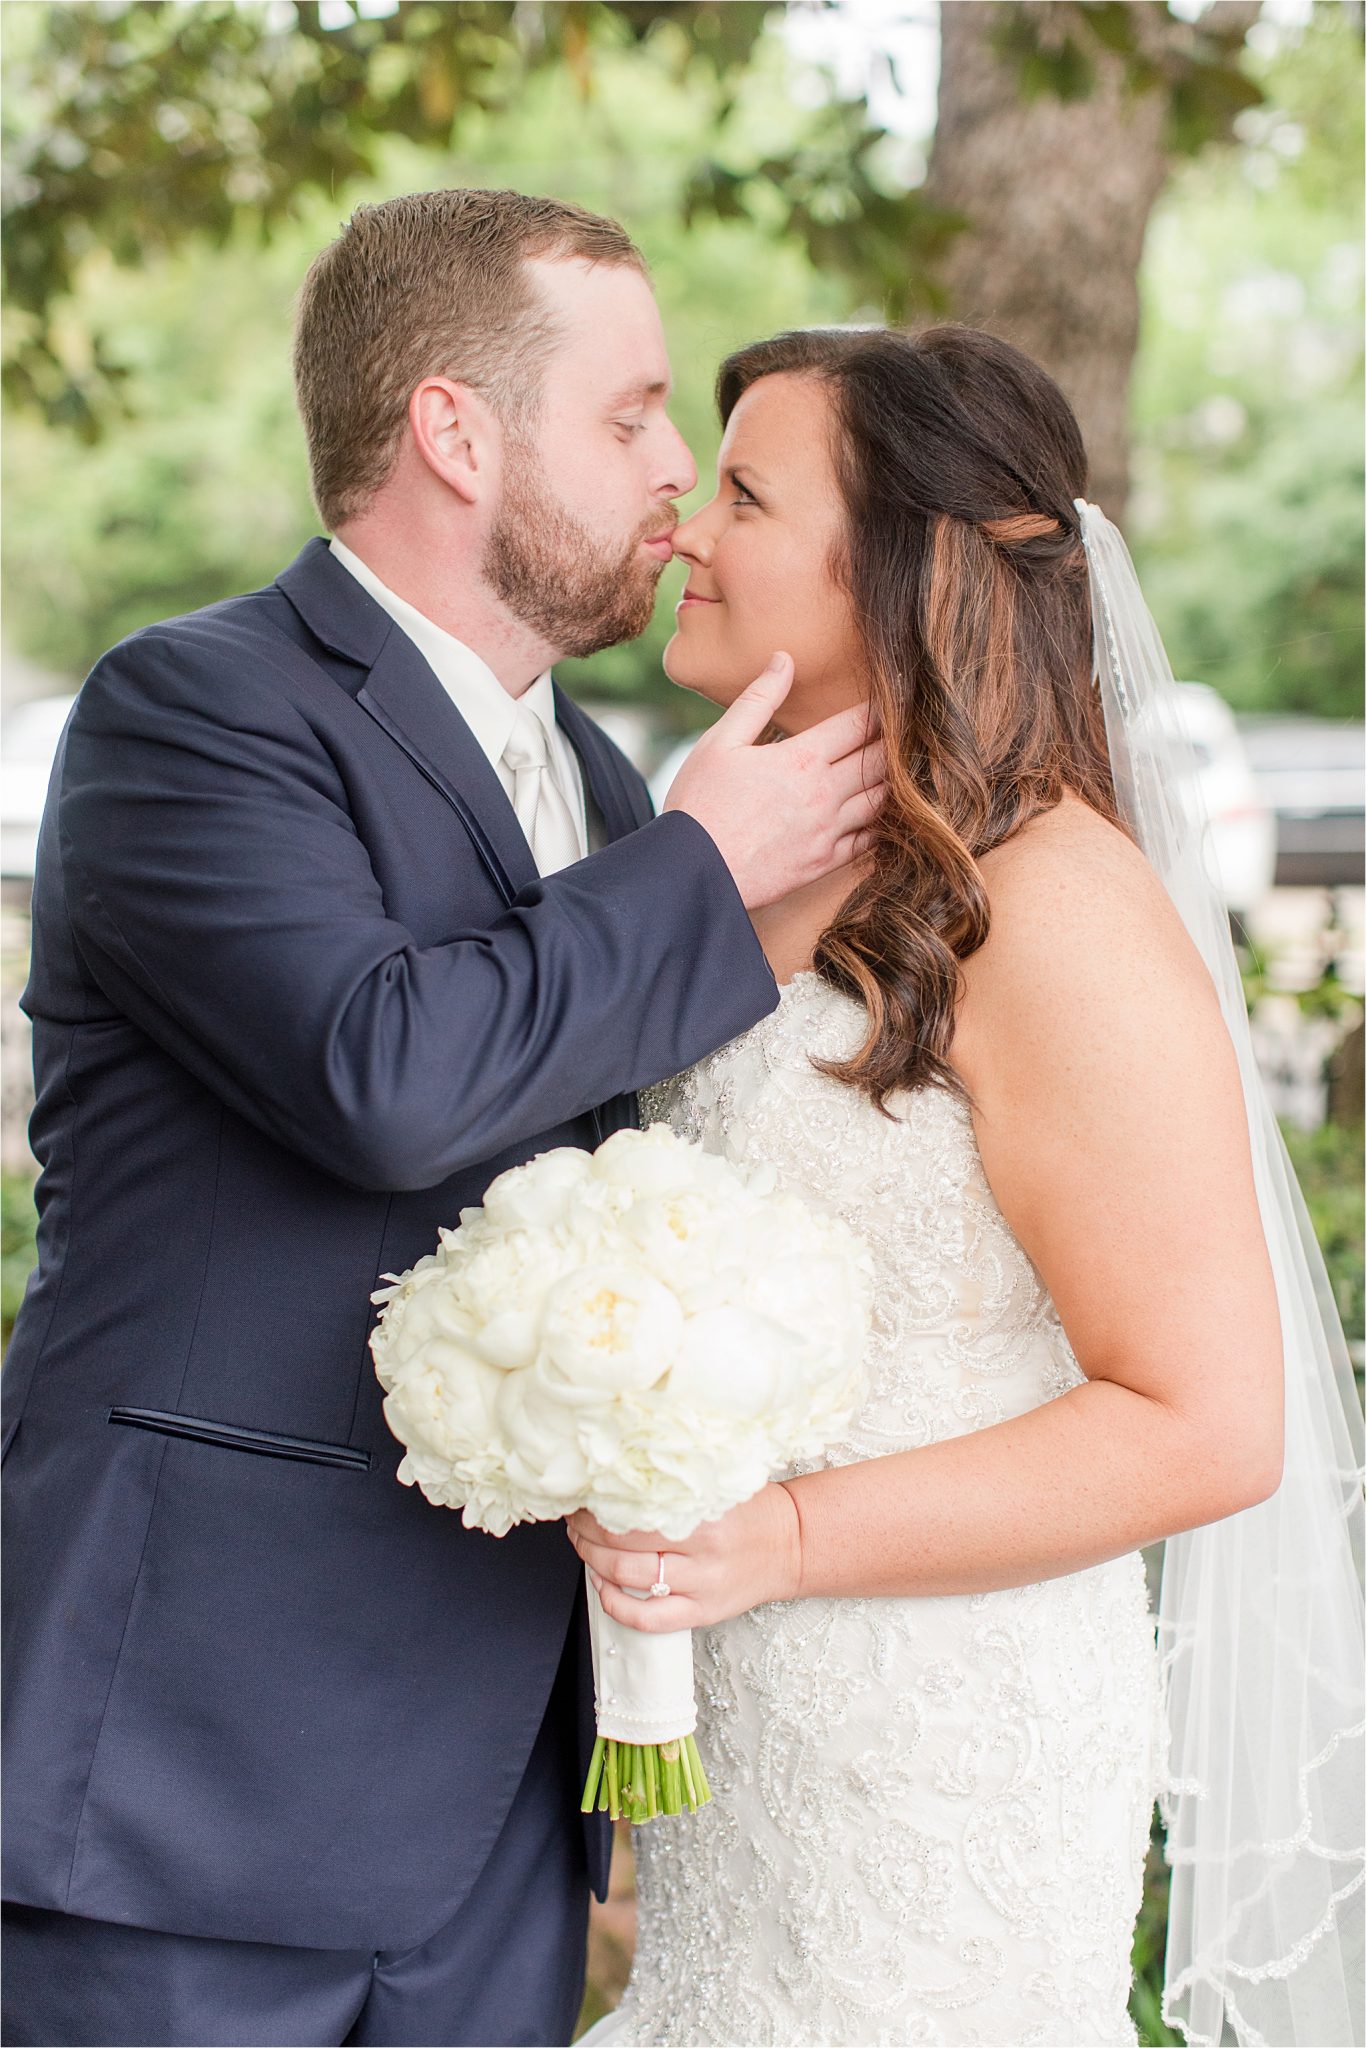 bride and groom photos-navy suit-white roses-wedding day photos-white tie-husband and wife photos-precious bride and groom photos-nose kisses